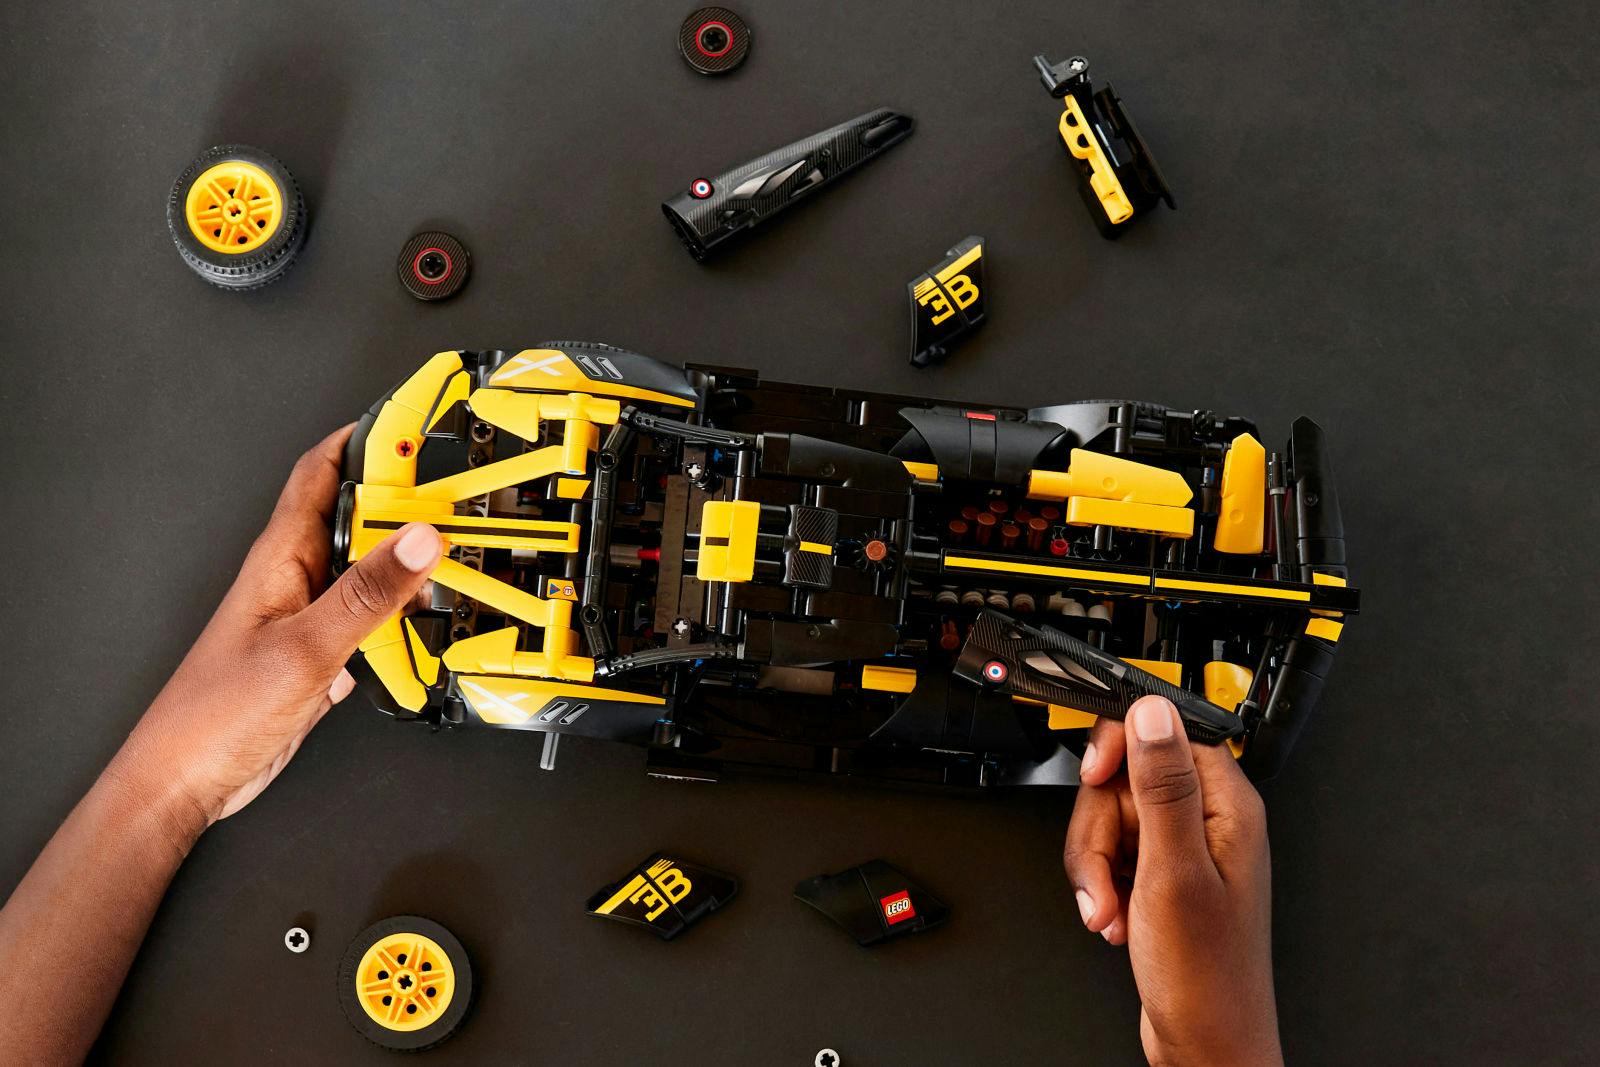 Finished in black and yellow, the LEGO Technic Bugatti Bolide pays homage to the favored colors of Ettore Bugatti.